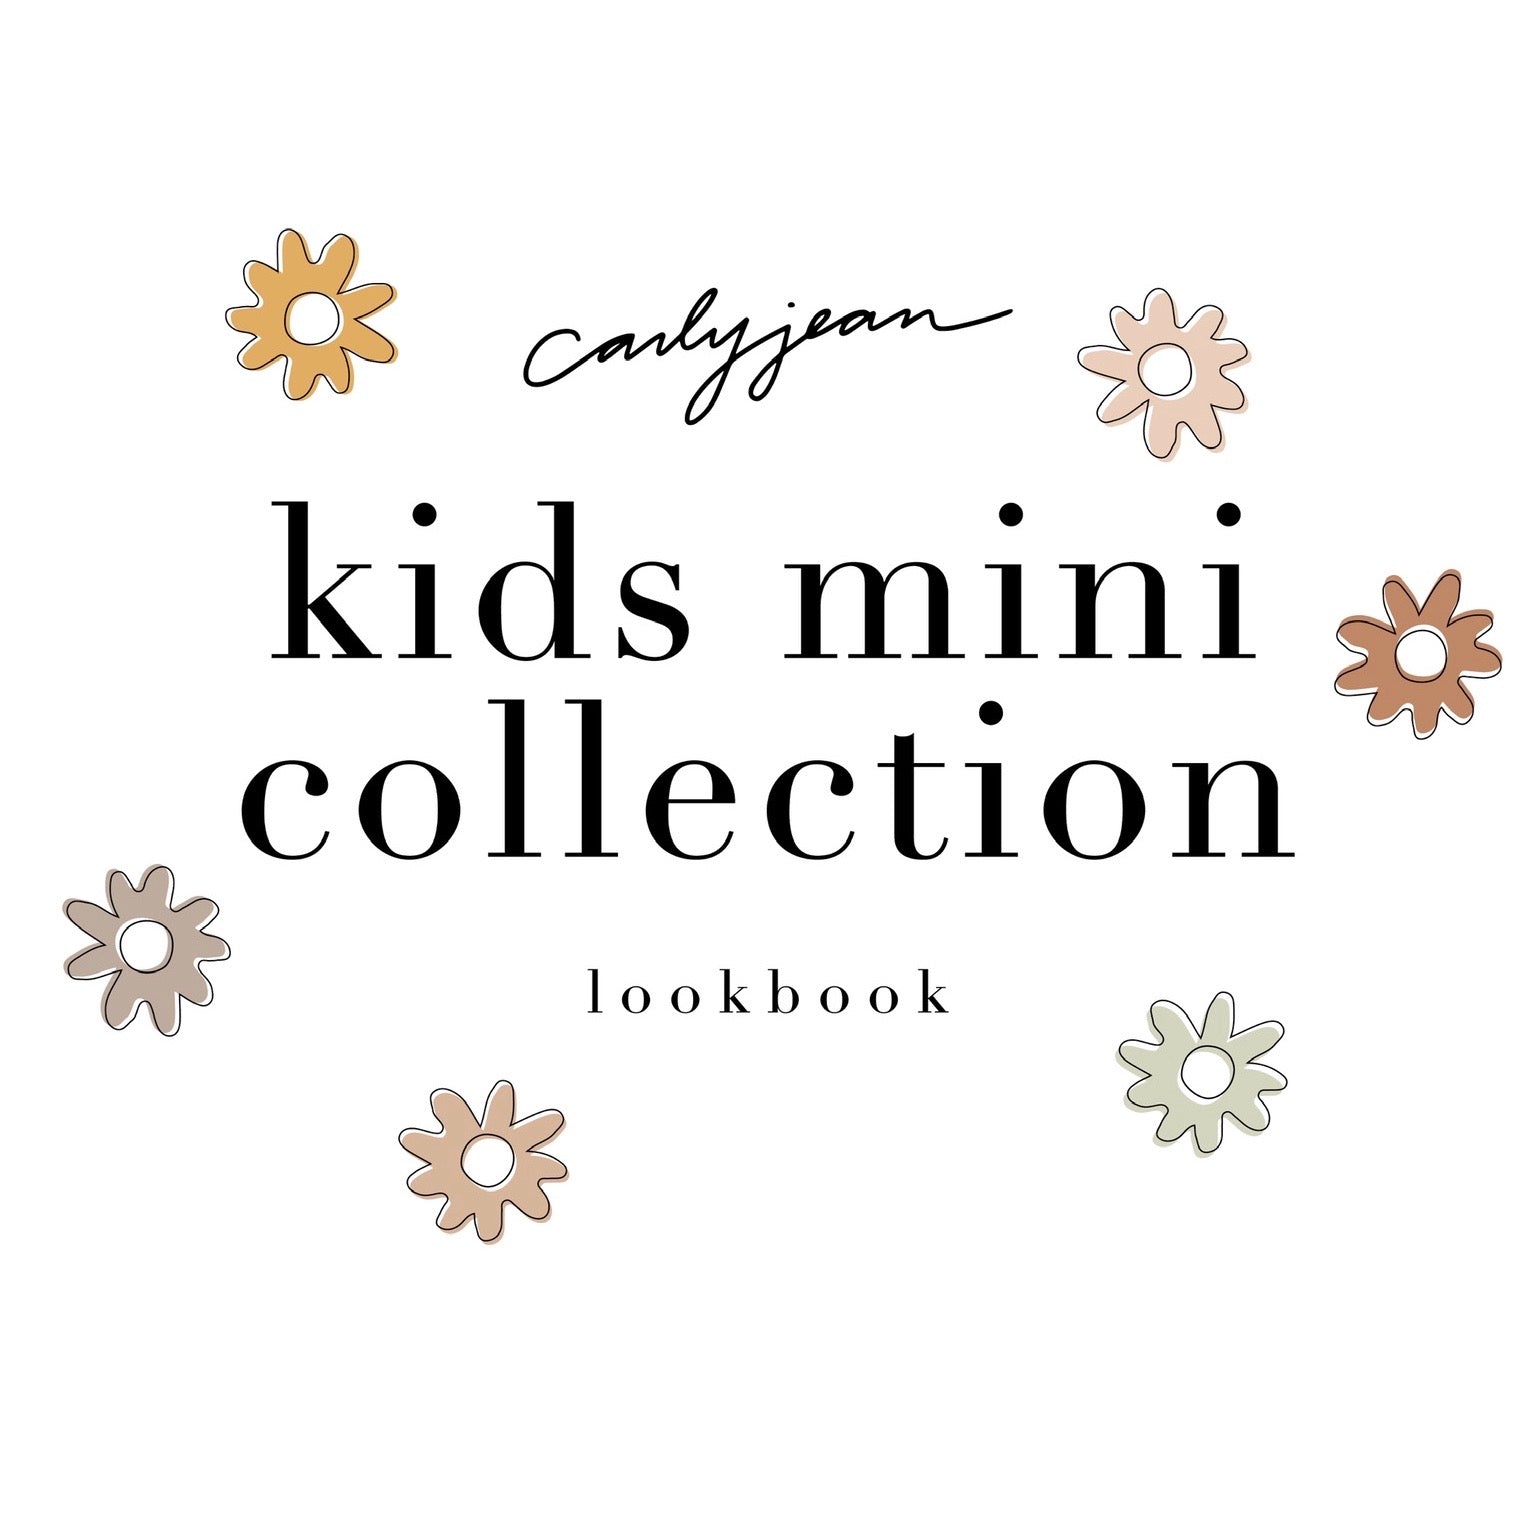 CJLA Kids Collection is coming soon!